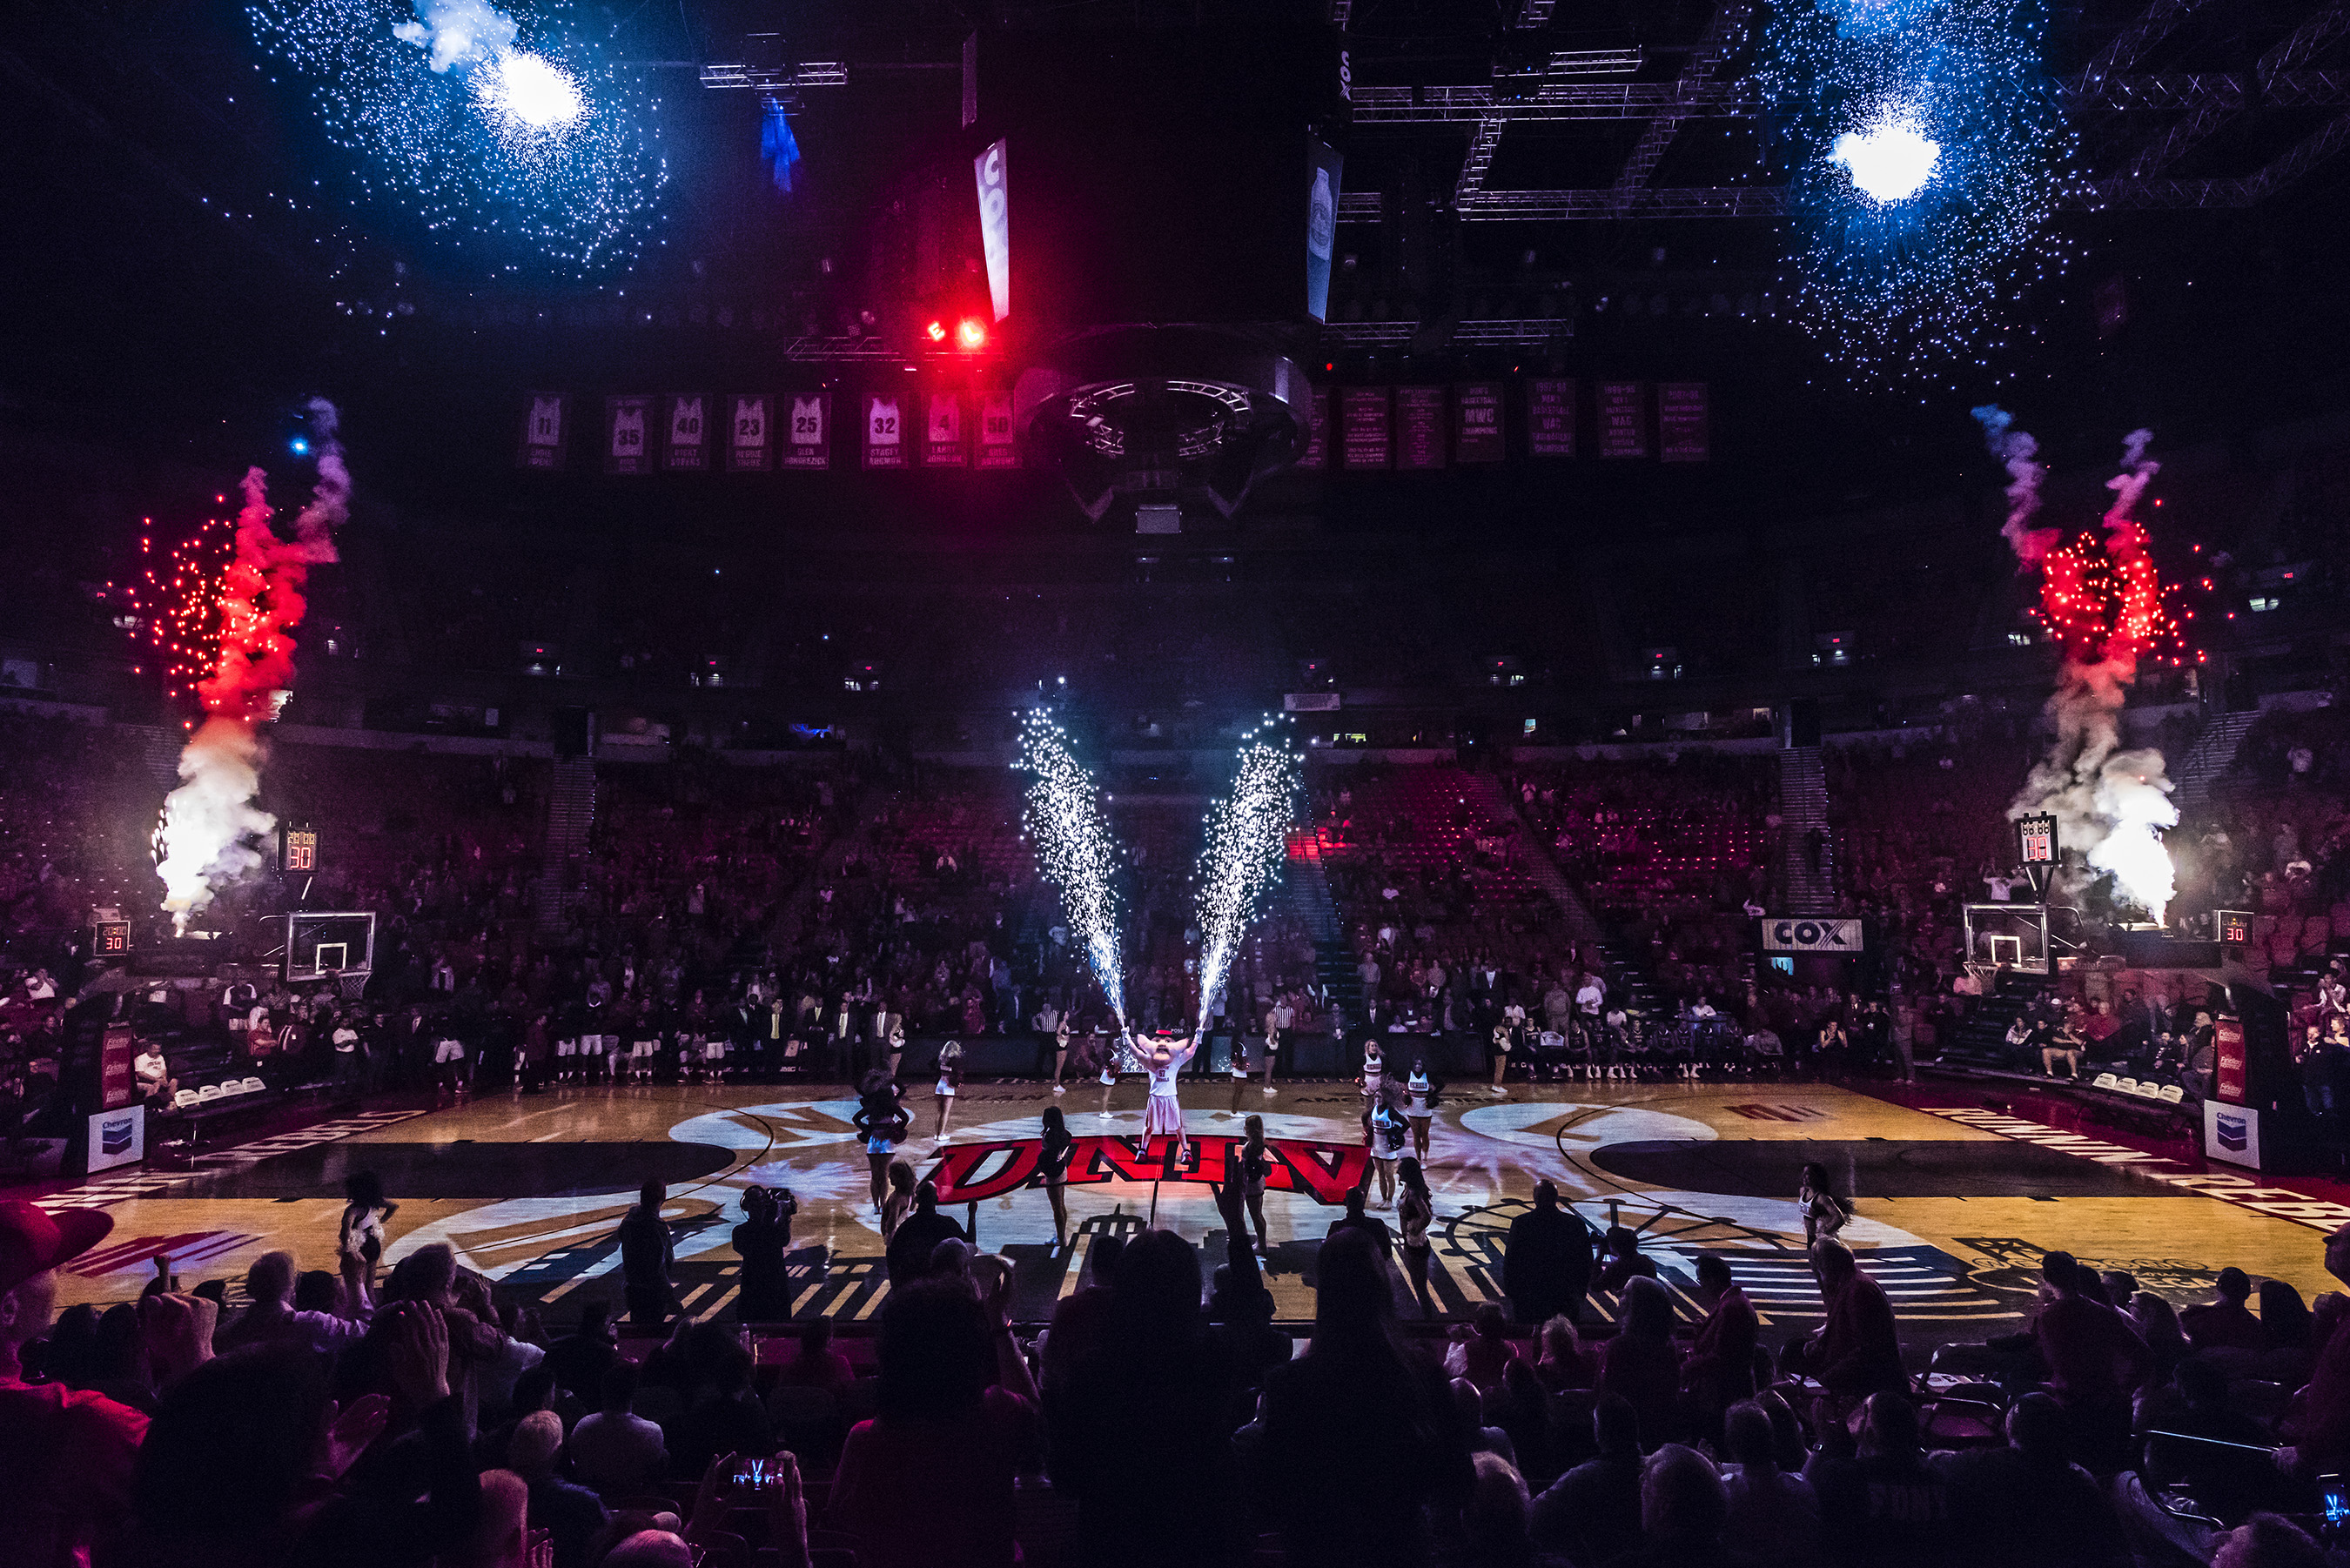 Epson Pro L25000U laser projectors power UNLV’s immersive pregame experience through the art of projection mapping